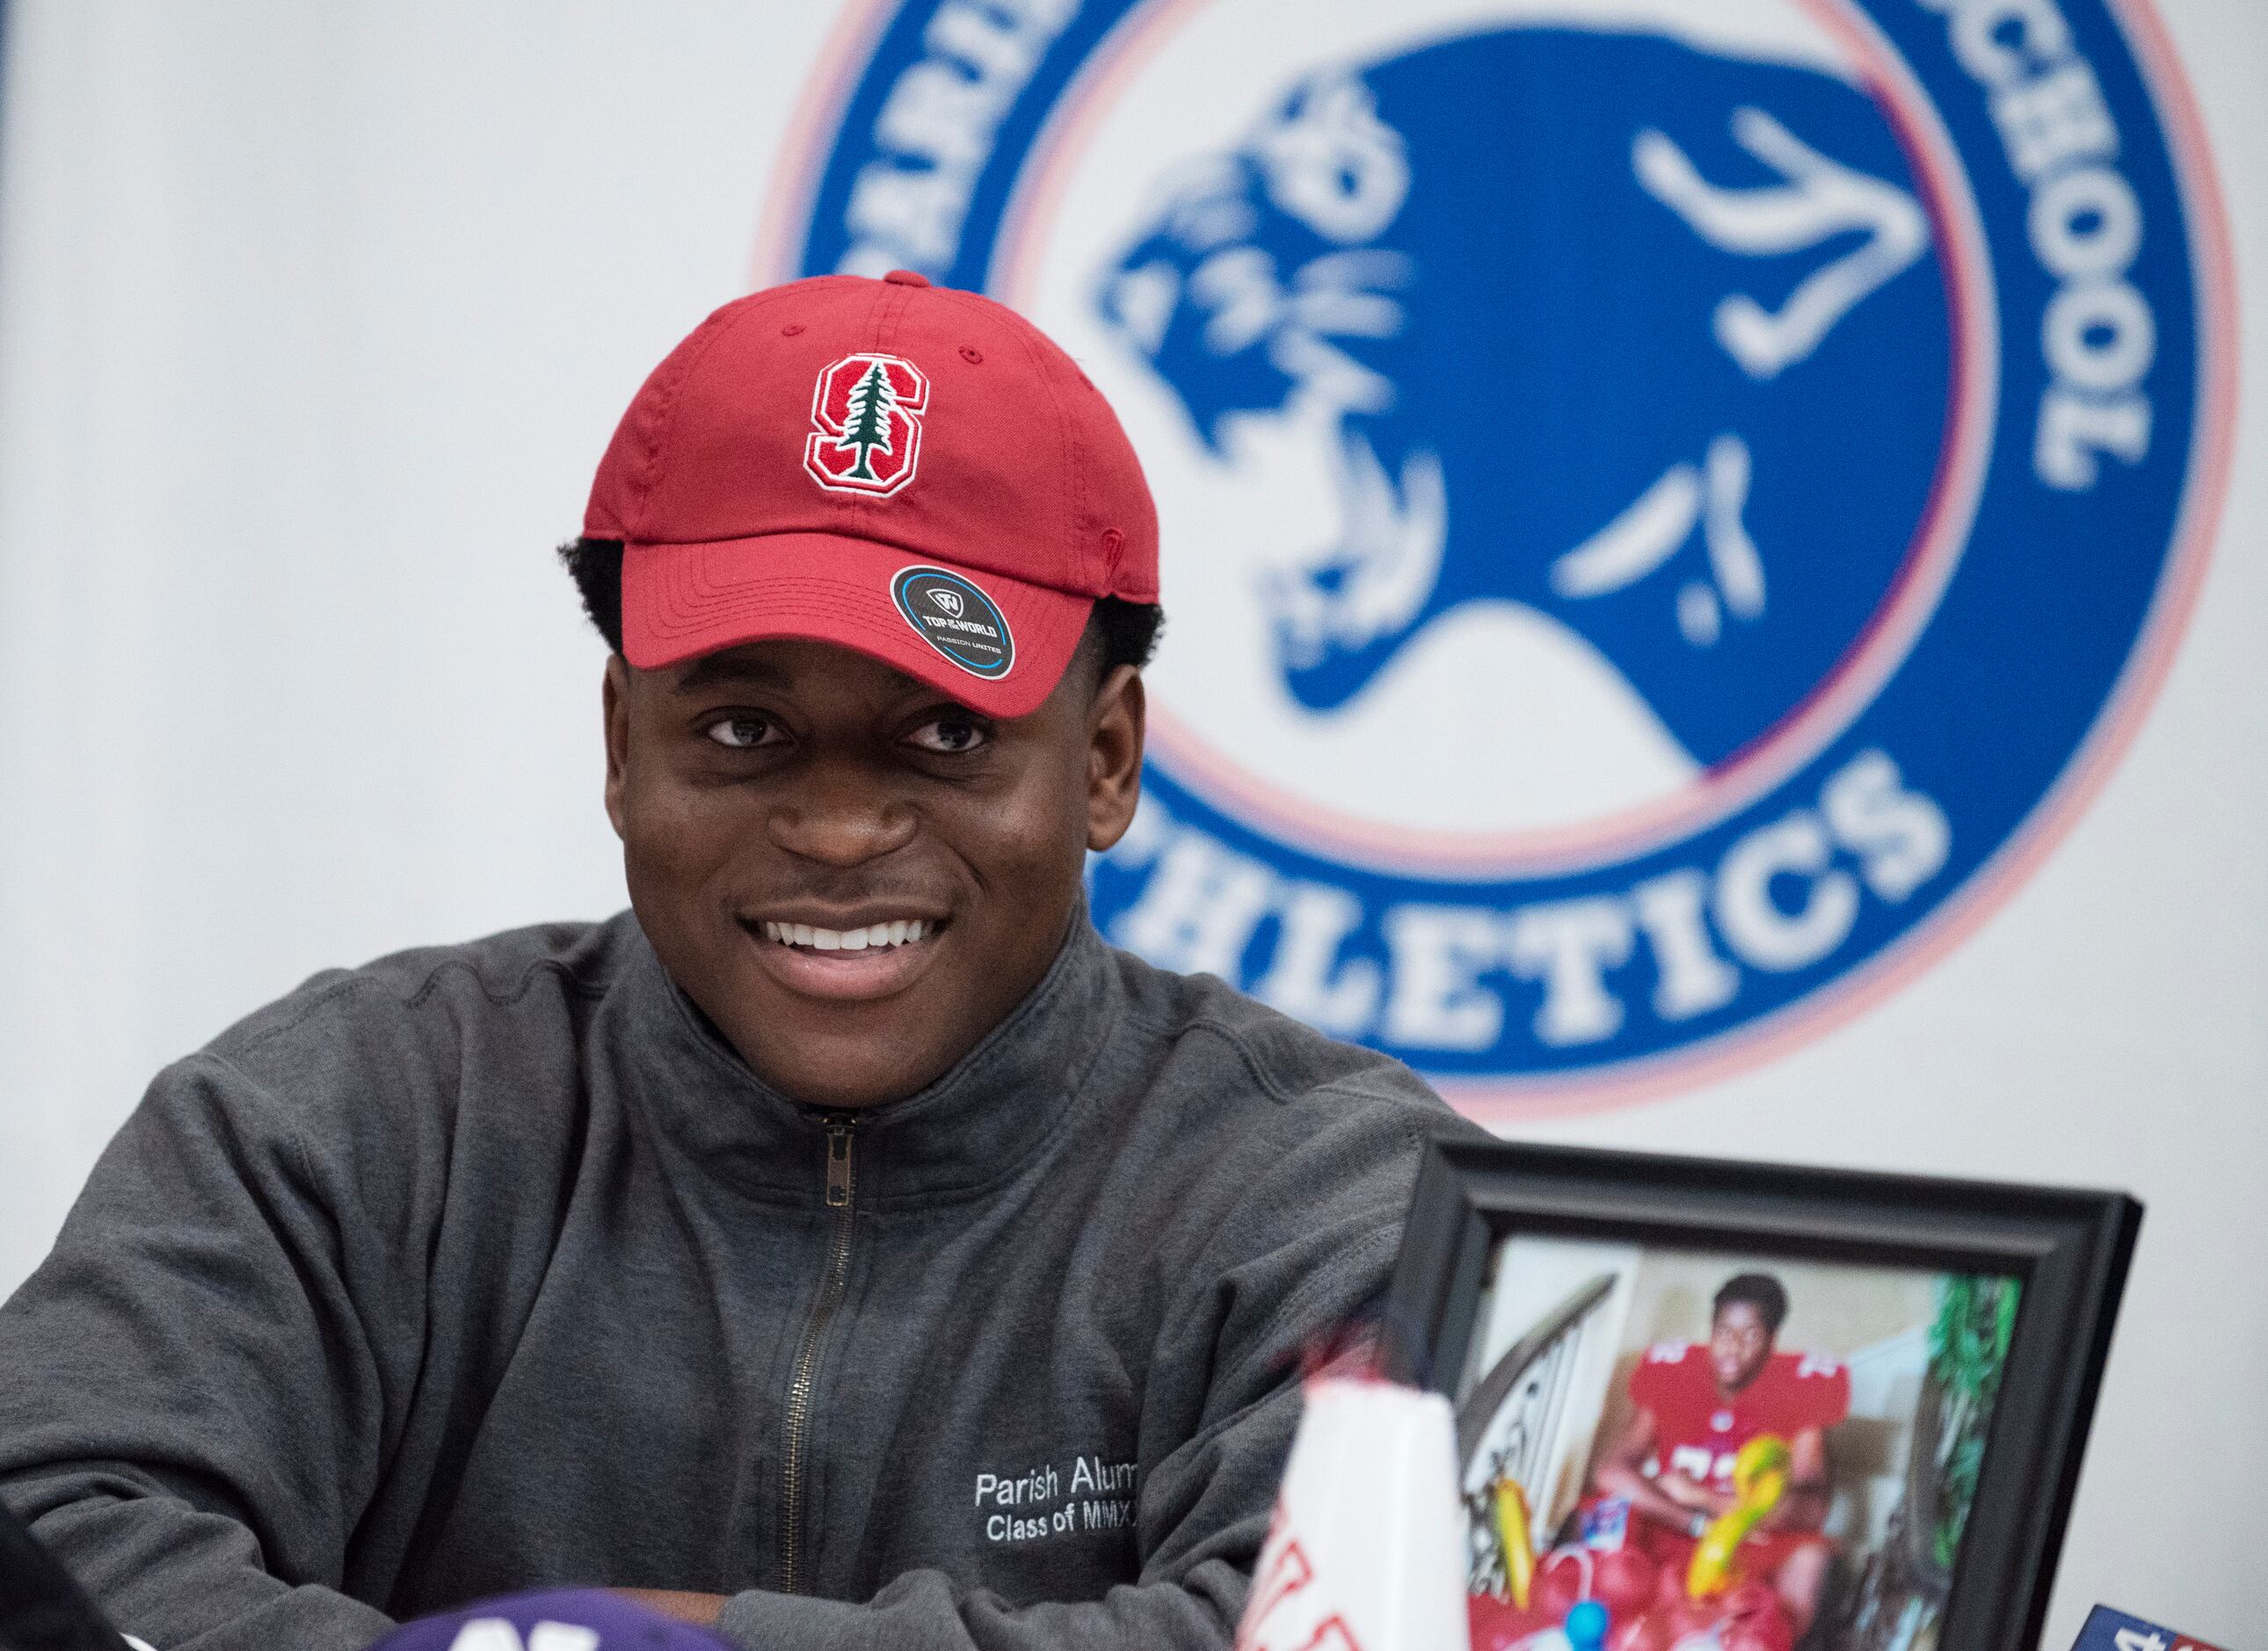 Senior Austin Uke smiles while wearing a Stanford University cap as he revealed he will be...